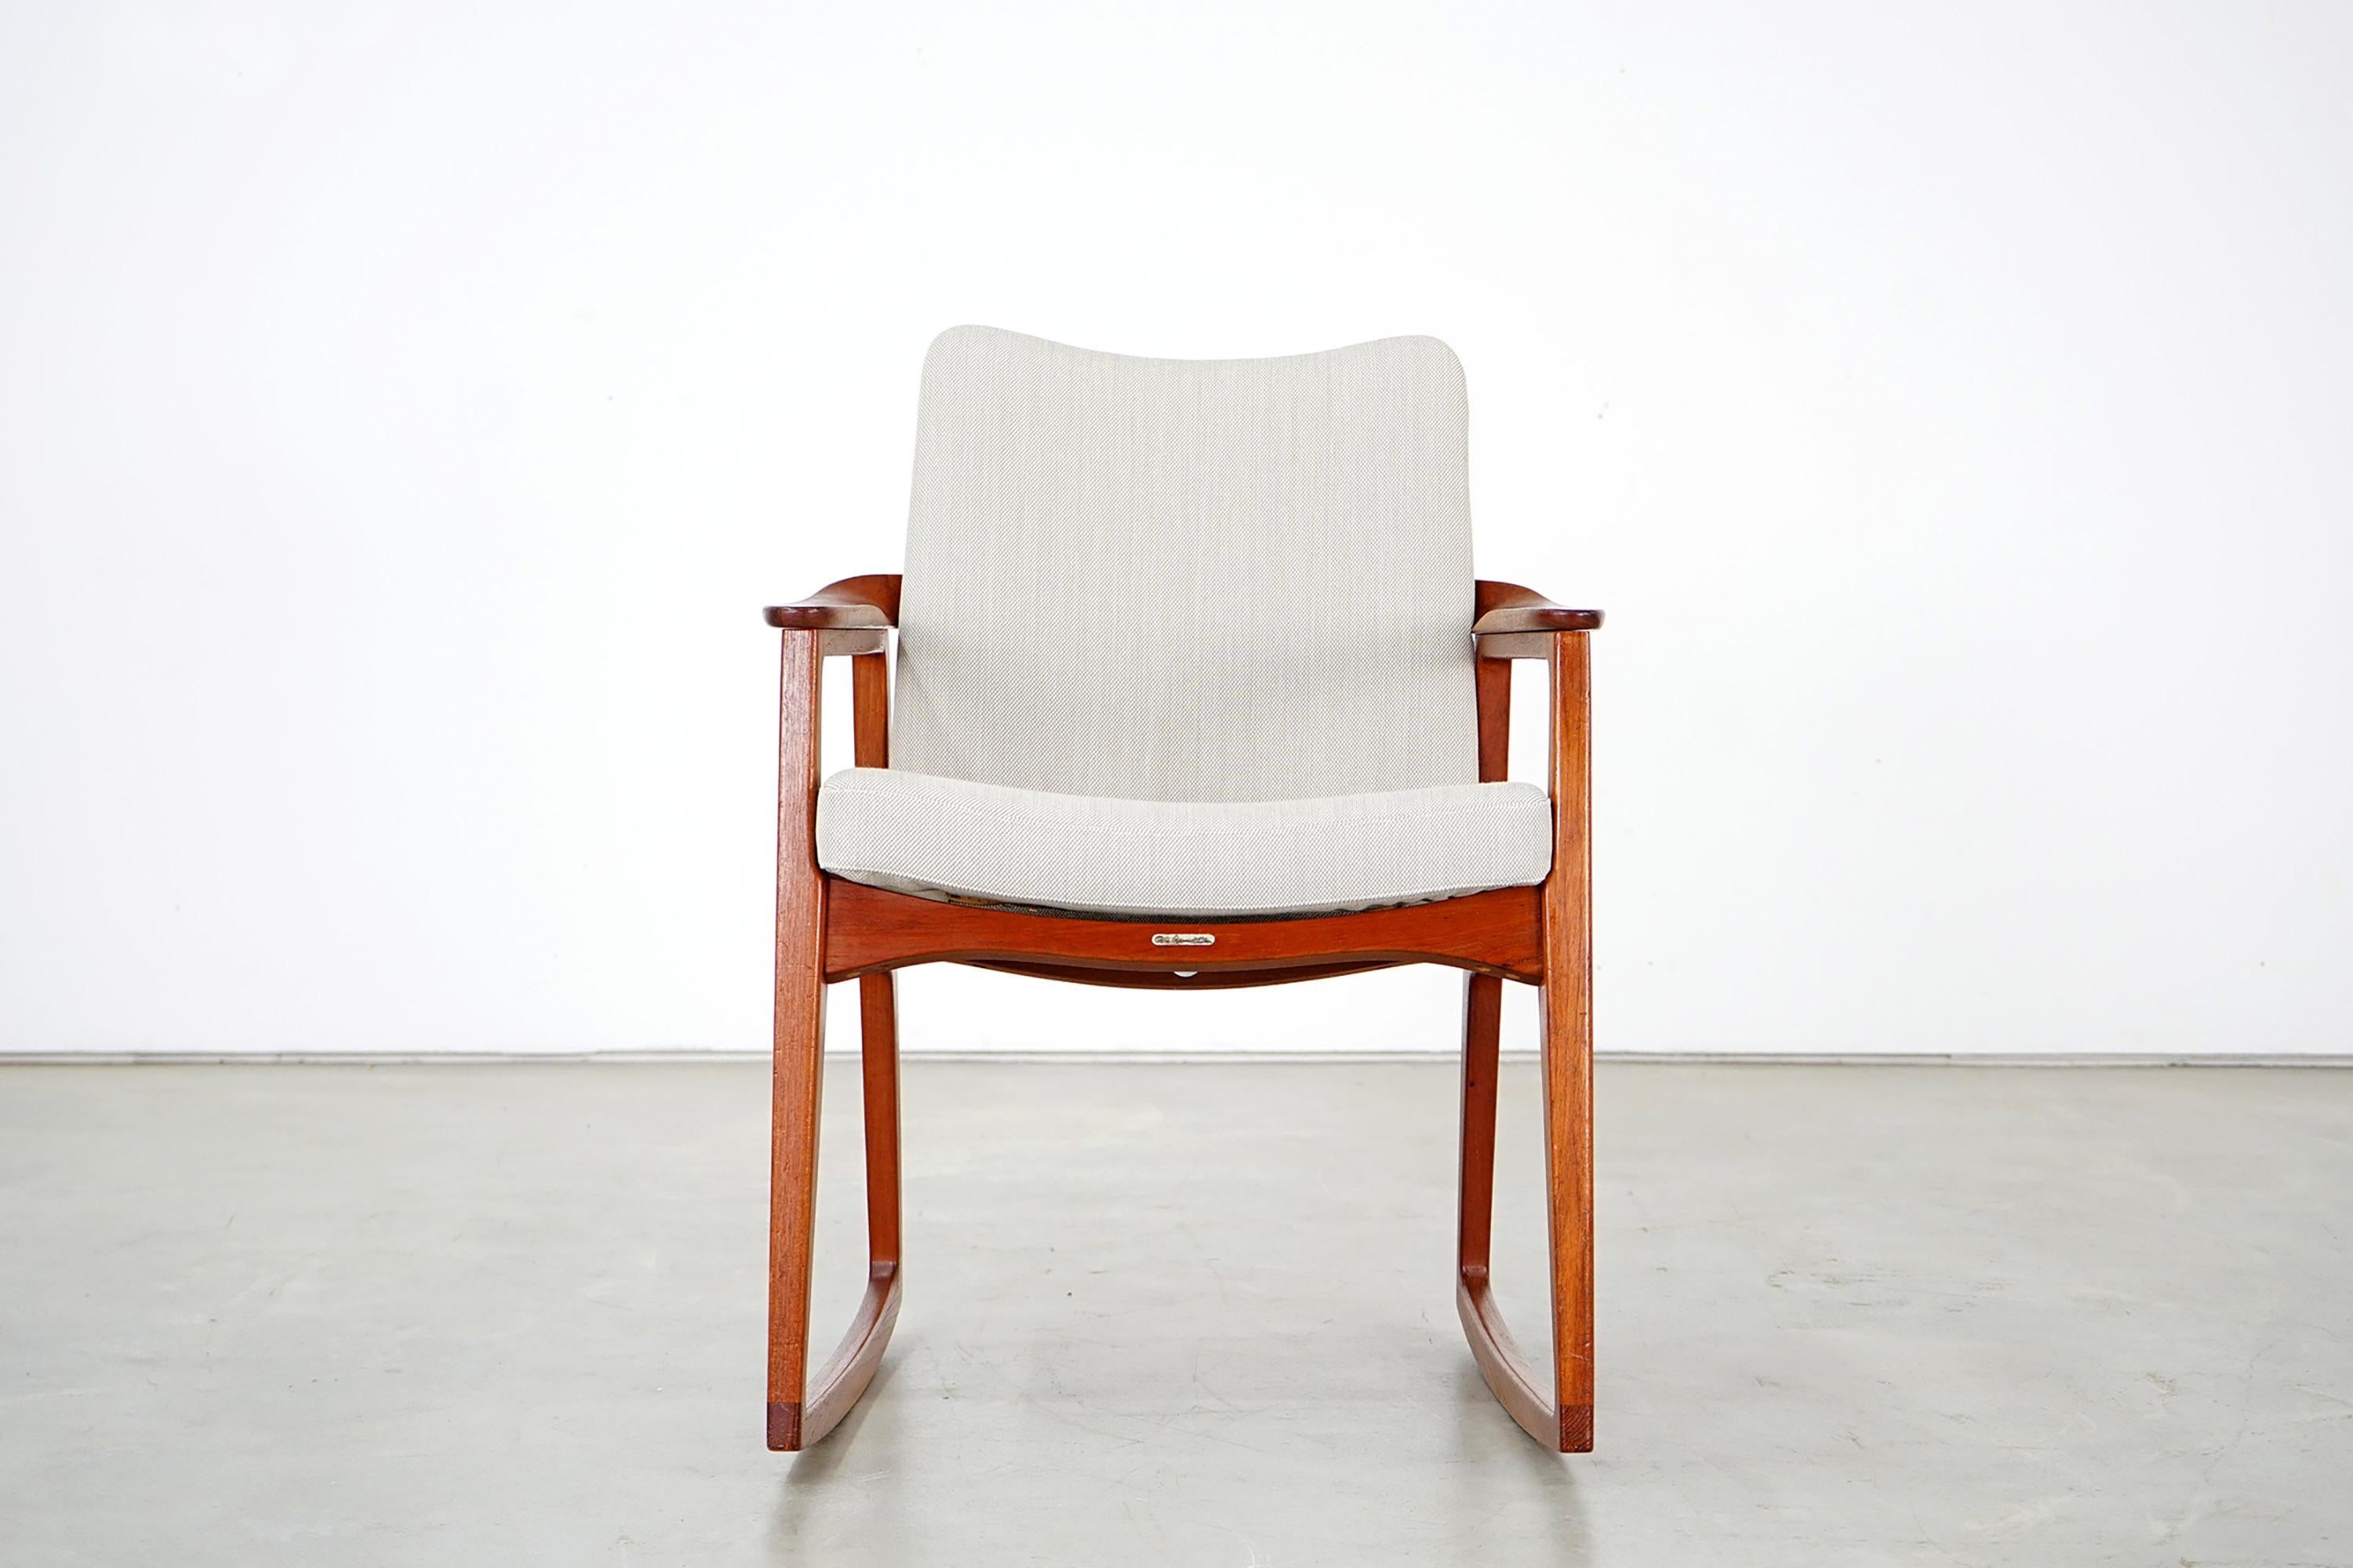 The design of the teak rocking chair created by Sigvard Bernadotte dates back to 1955. In his design work, Bernadotte often used tight and concentrated shapes, which is reflected in this model. The chair was first produced by the Danish manufacturer